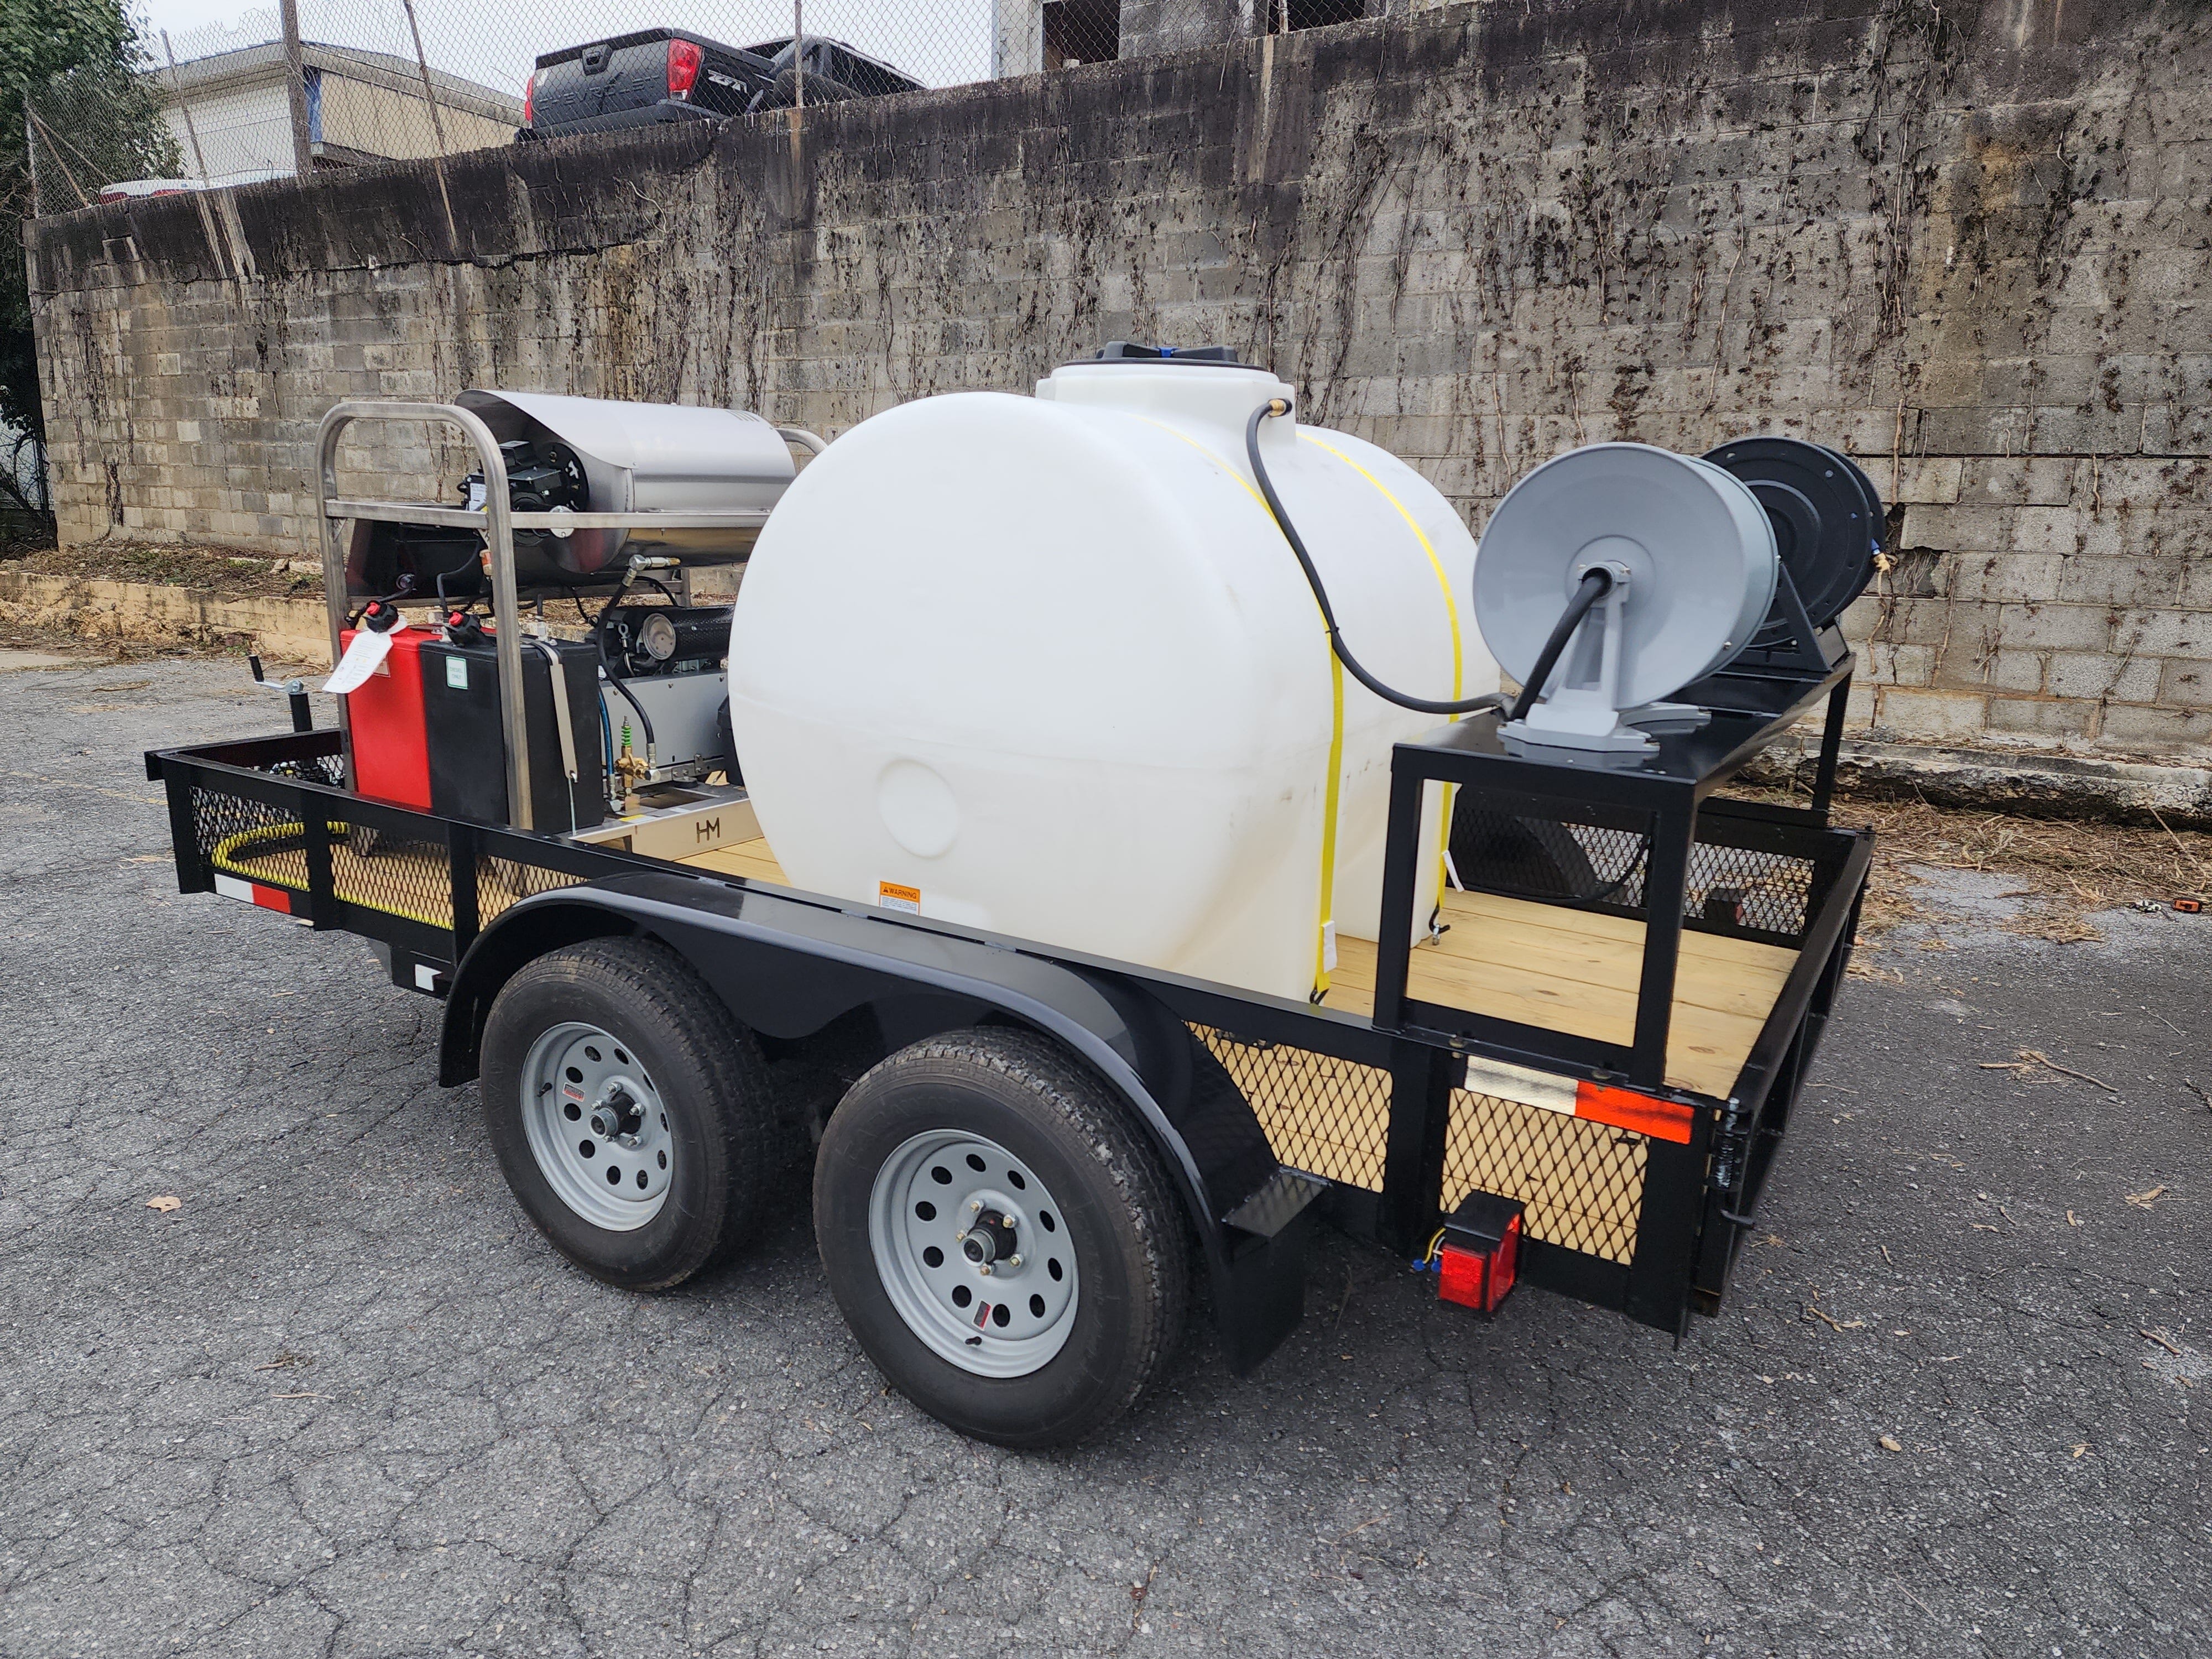 Hydro Max 10gpm at 3500psi- Hot Water Trailer Package-GX Honda-Fuel Injected Pressure Washer Trailer Package BCE Cleaning Systems 